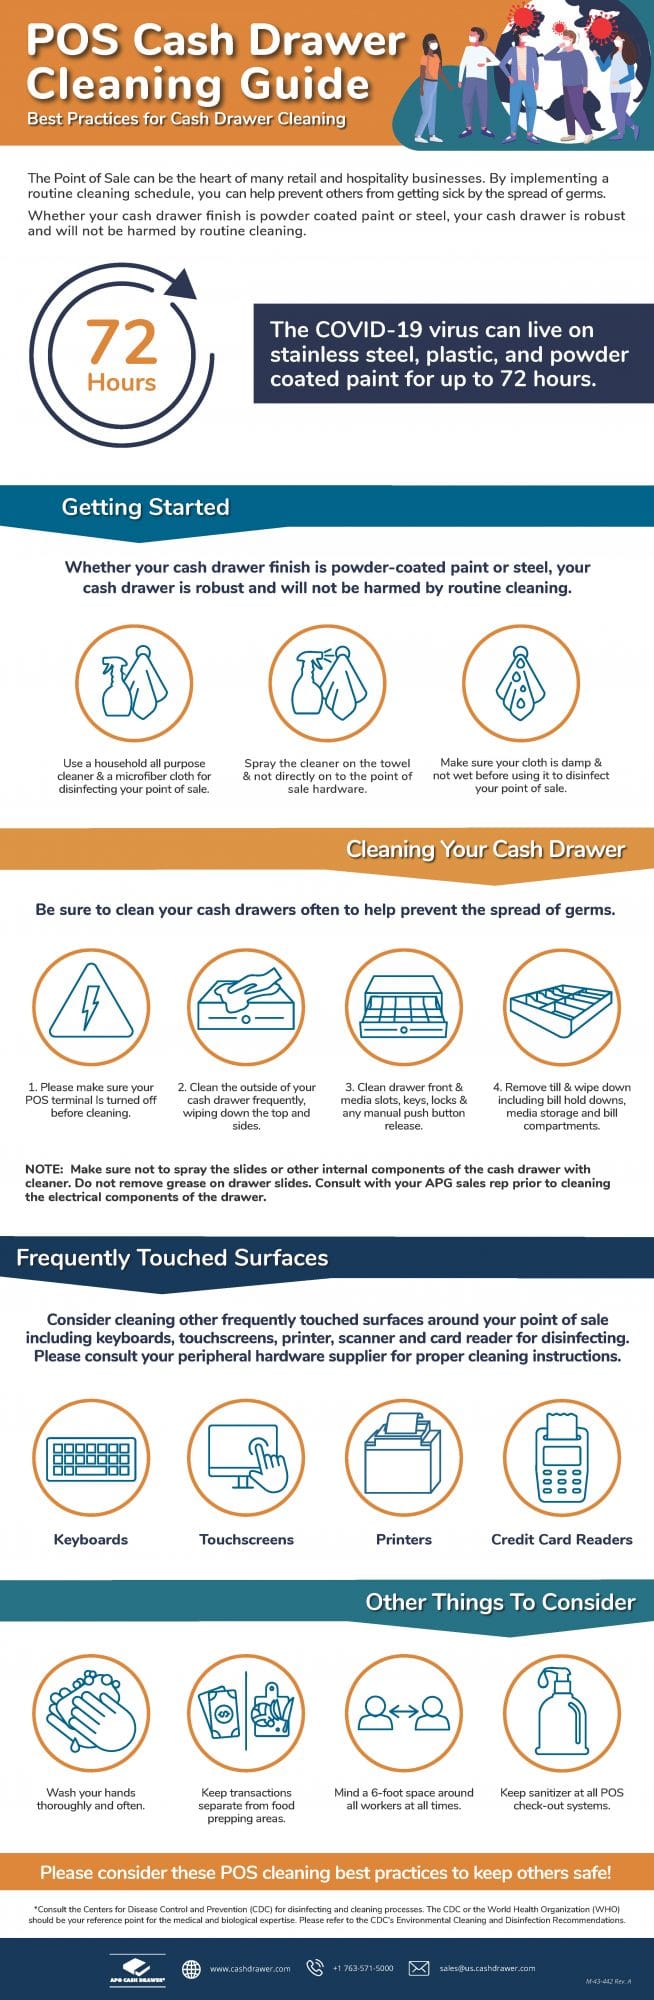 POS Hardware Cleaning Guide [Infographic]